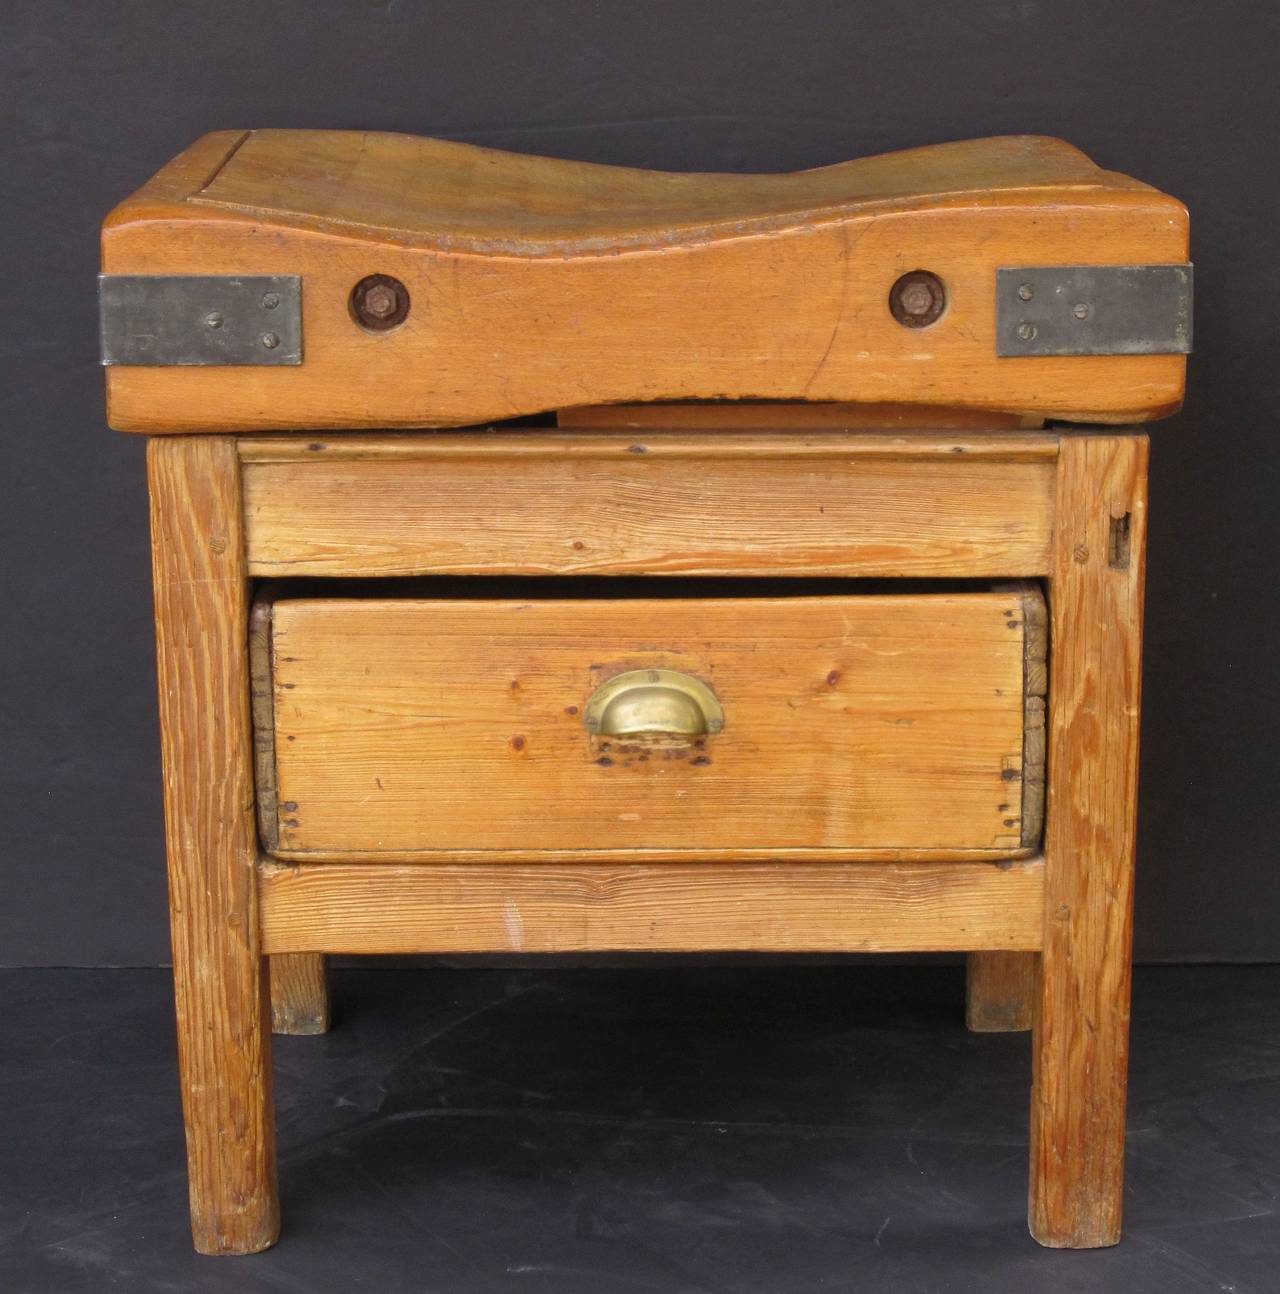 A two-tiered butcher's chopping block or table featuring a large, rectangular sloping block or slab of iron-bound wood set upon a bottom tier four-legged, paneled support stand of pine, with fitted drawer and brass pull handle, the drawer opening on